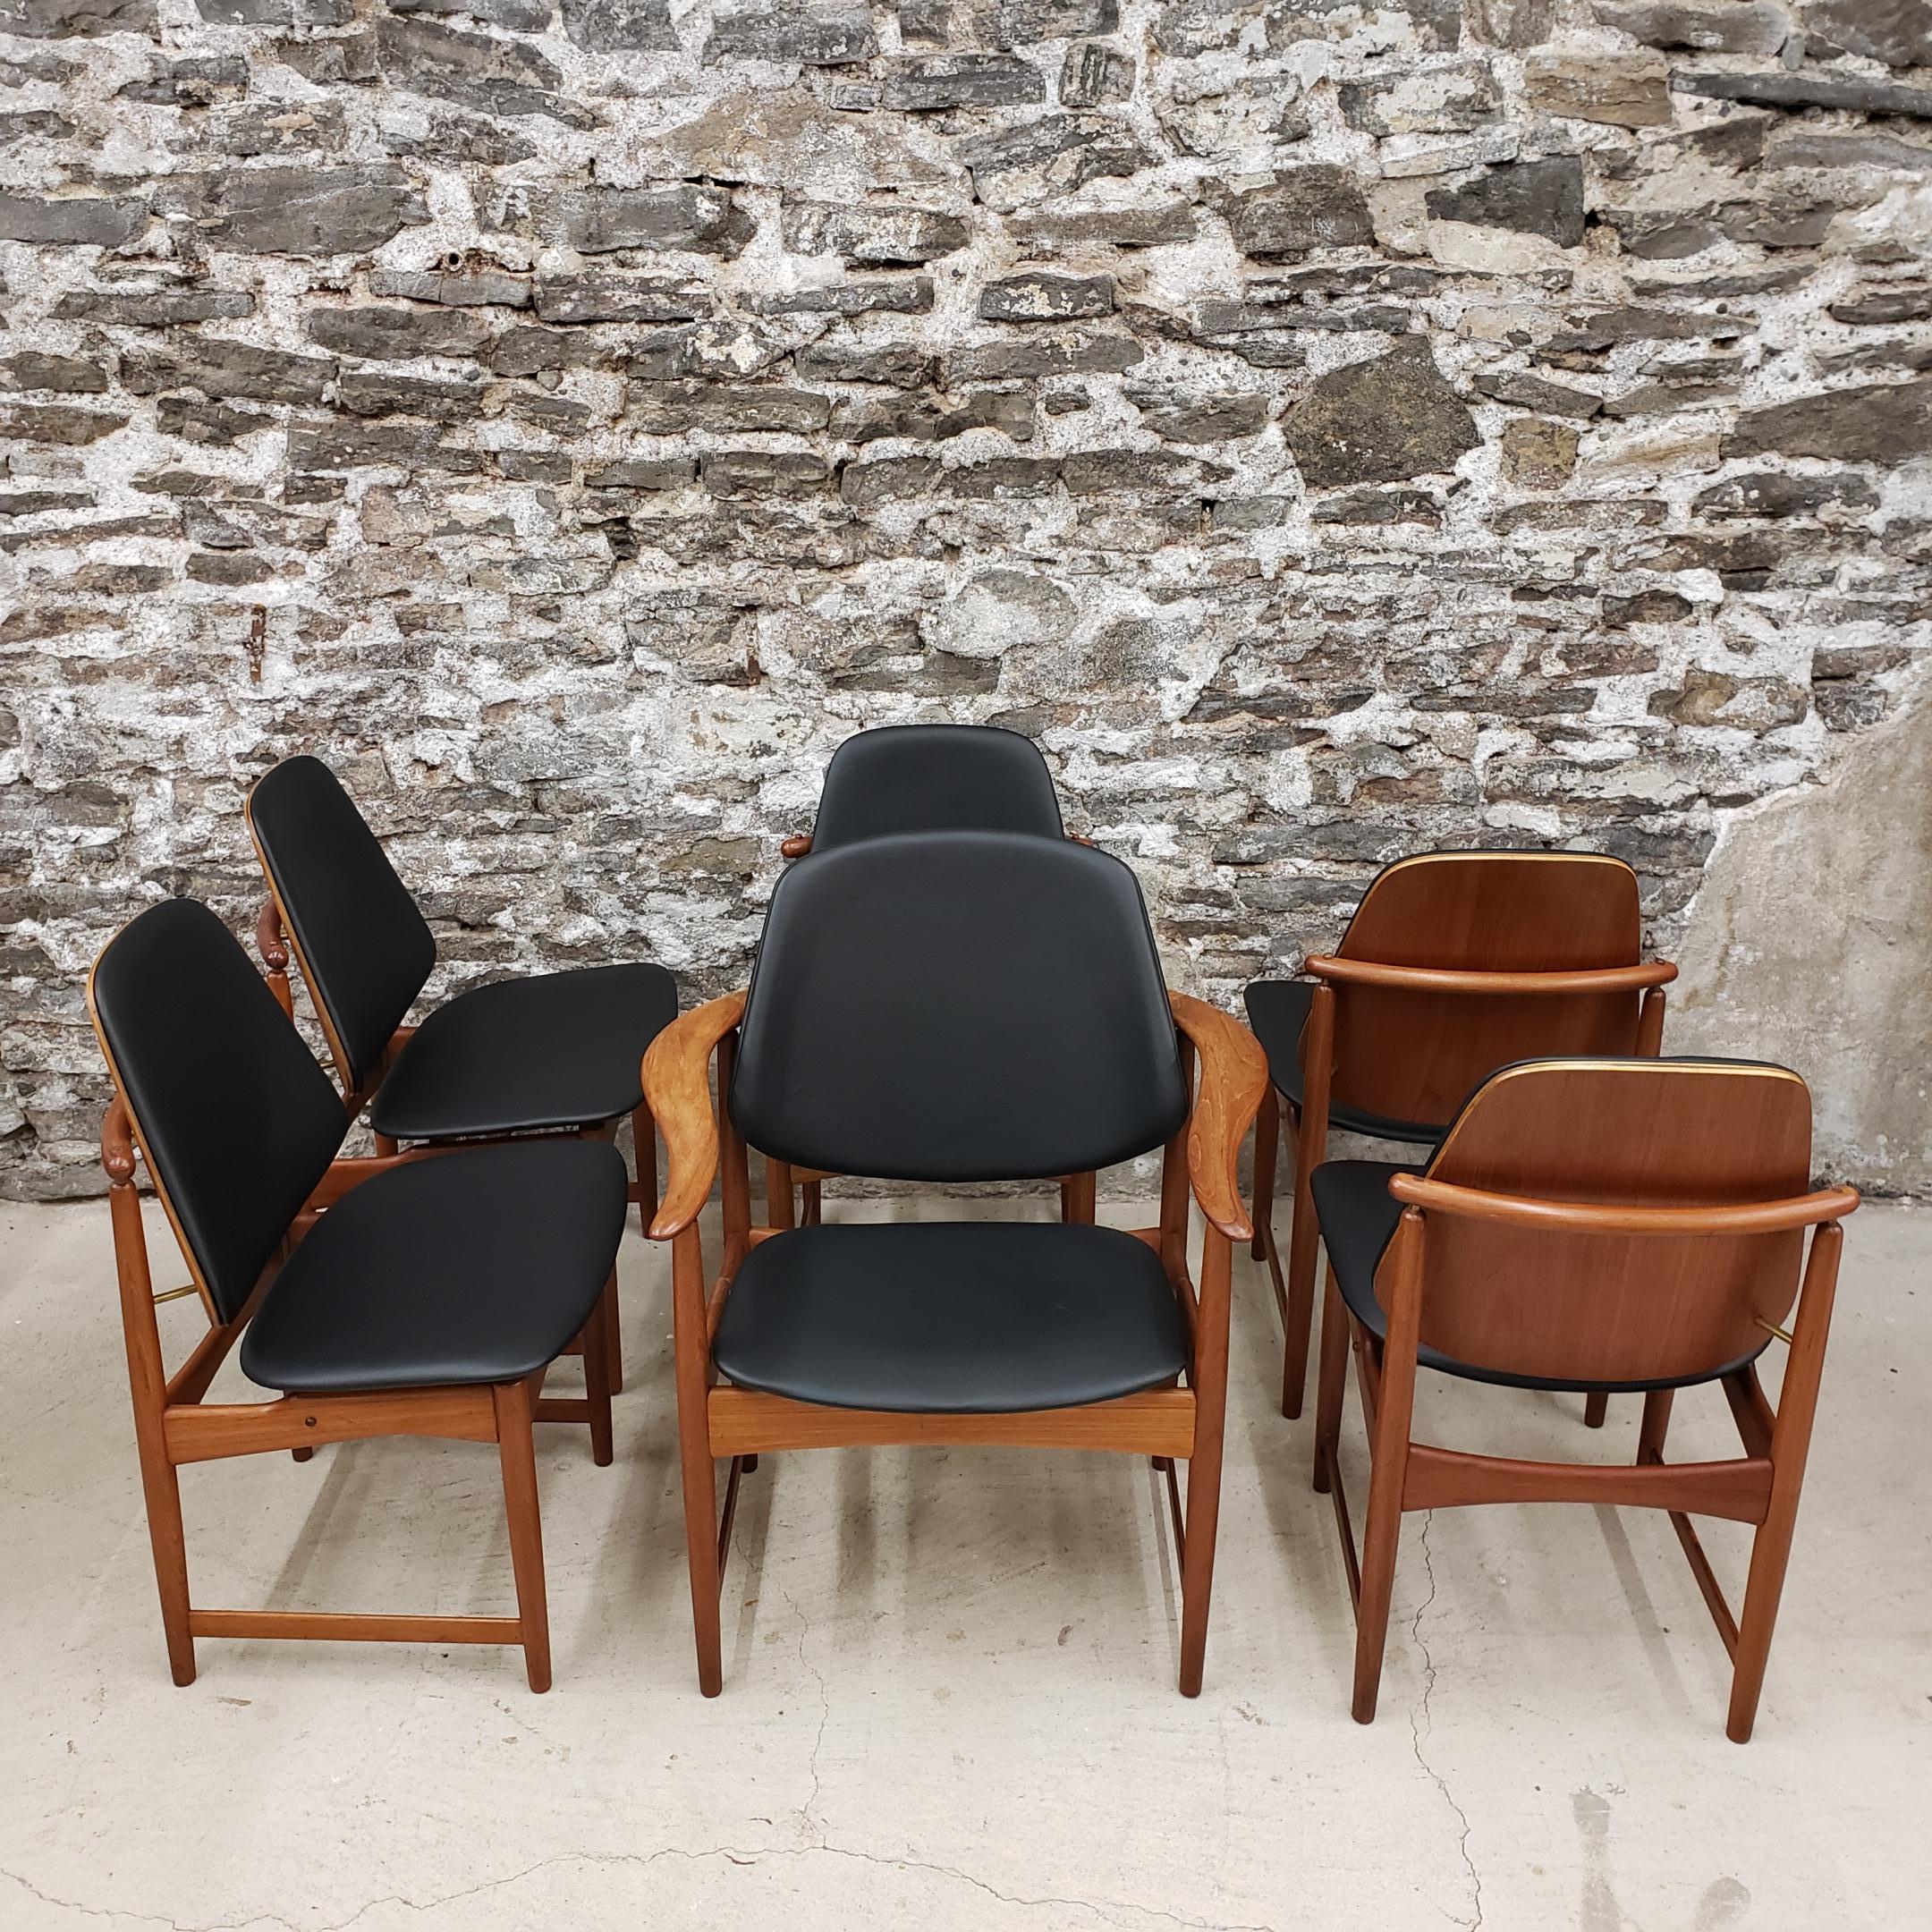 Set of six Danish teak dining chairs designed by Arne Hovmand-Olsen and produced by Onsild Møbelfabrik for Jutex, Århus in Denmark. Includes one captains chair and they've just been re-upholstered and the foam replaced. 

Scandinavian Modern /